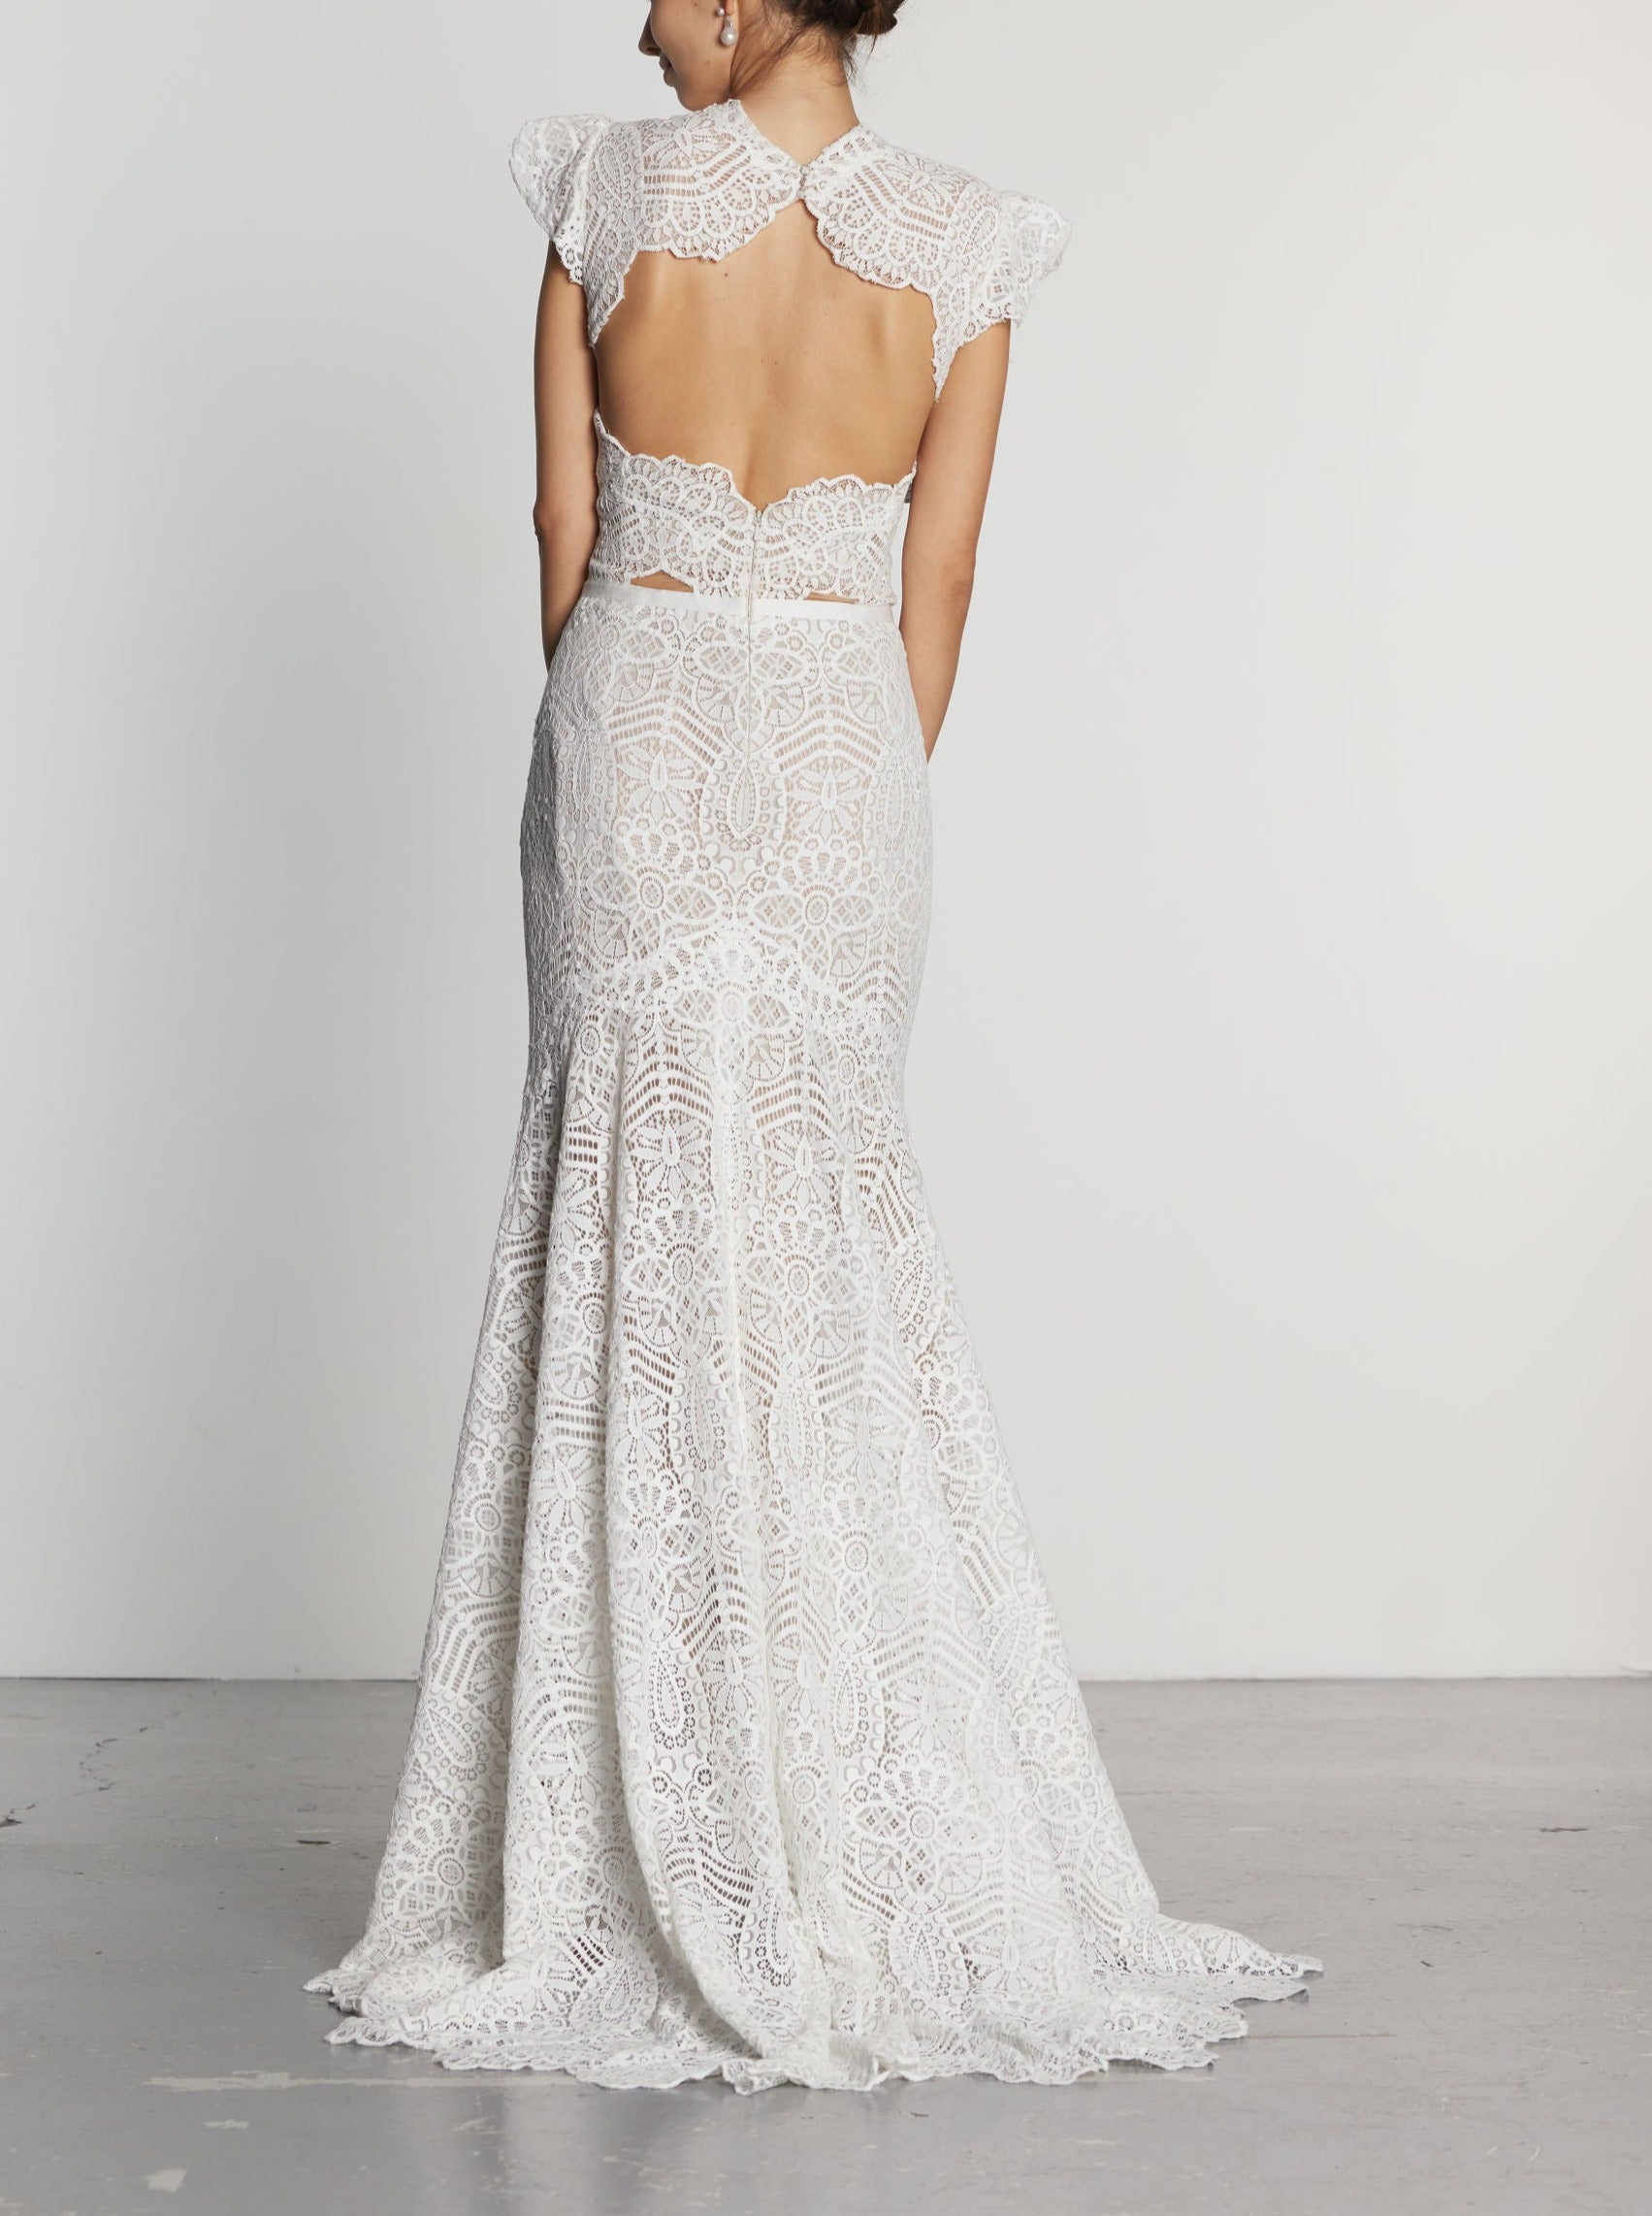 A view of the back of the Cosette Boho Lace Wedding Dress